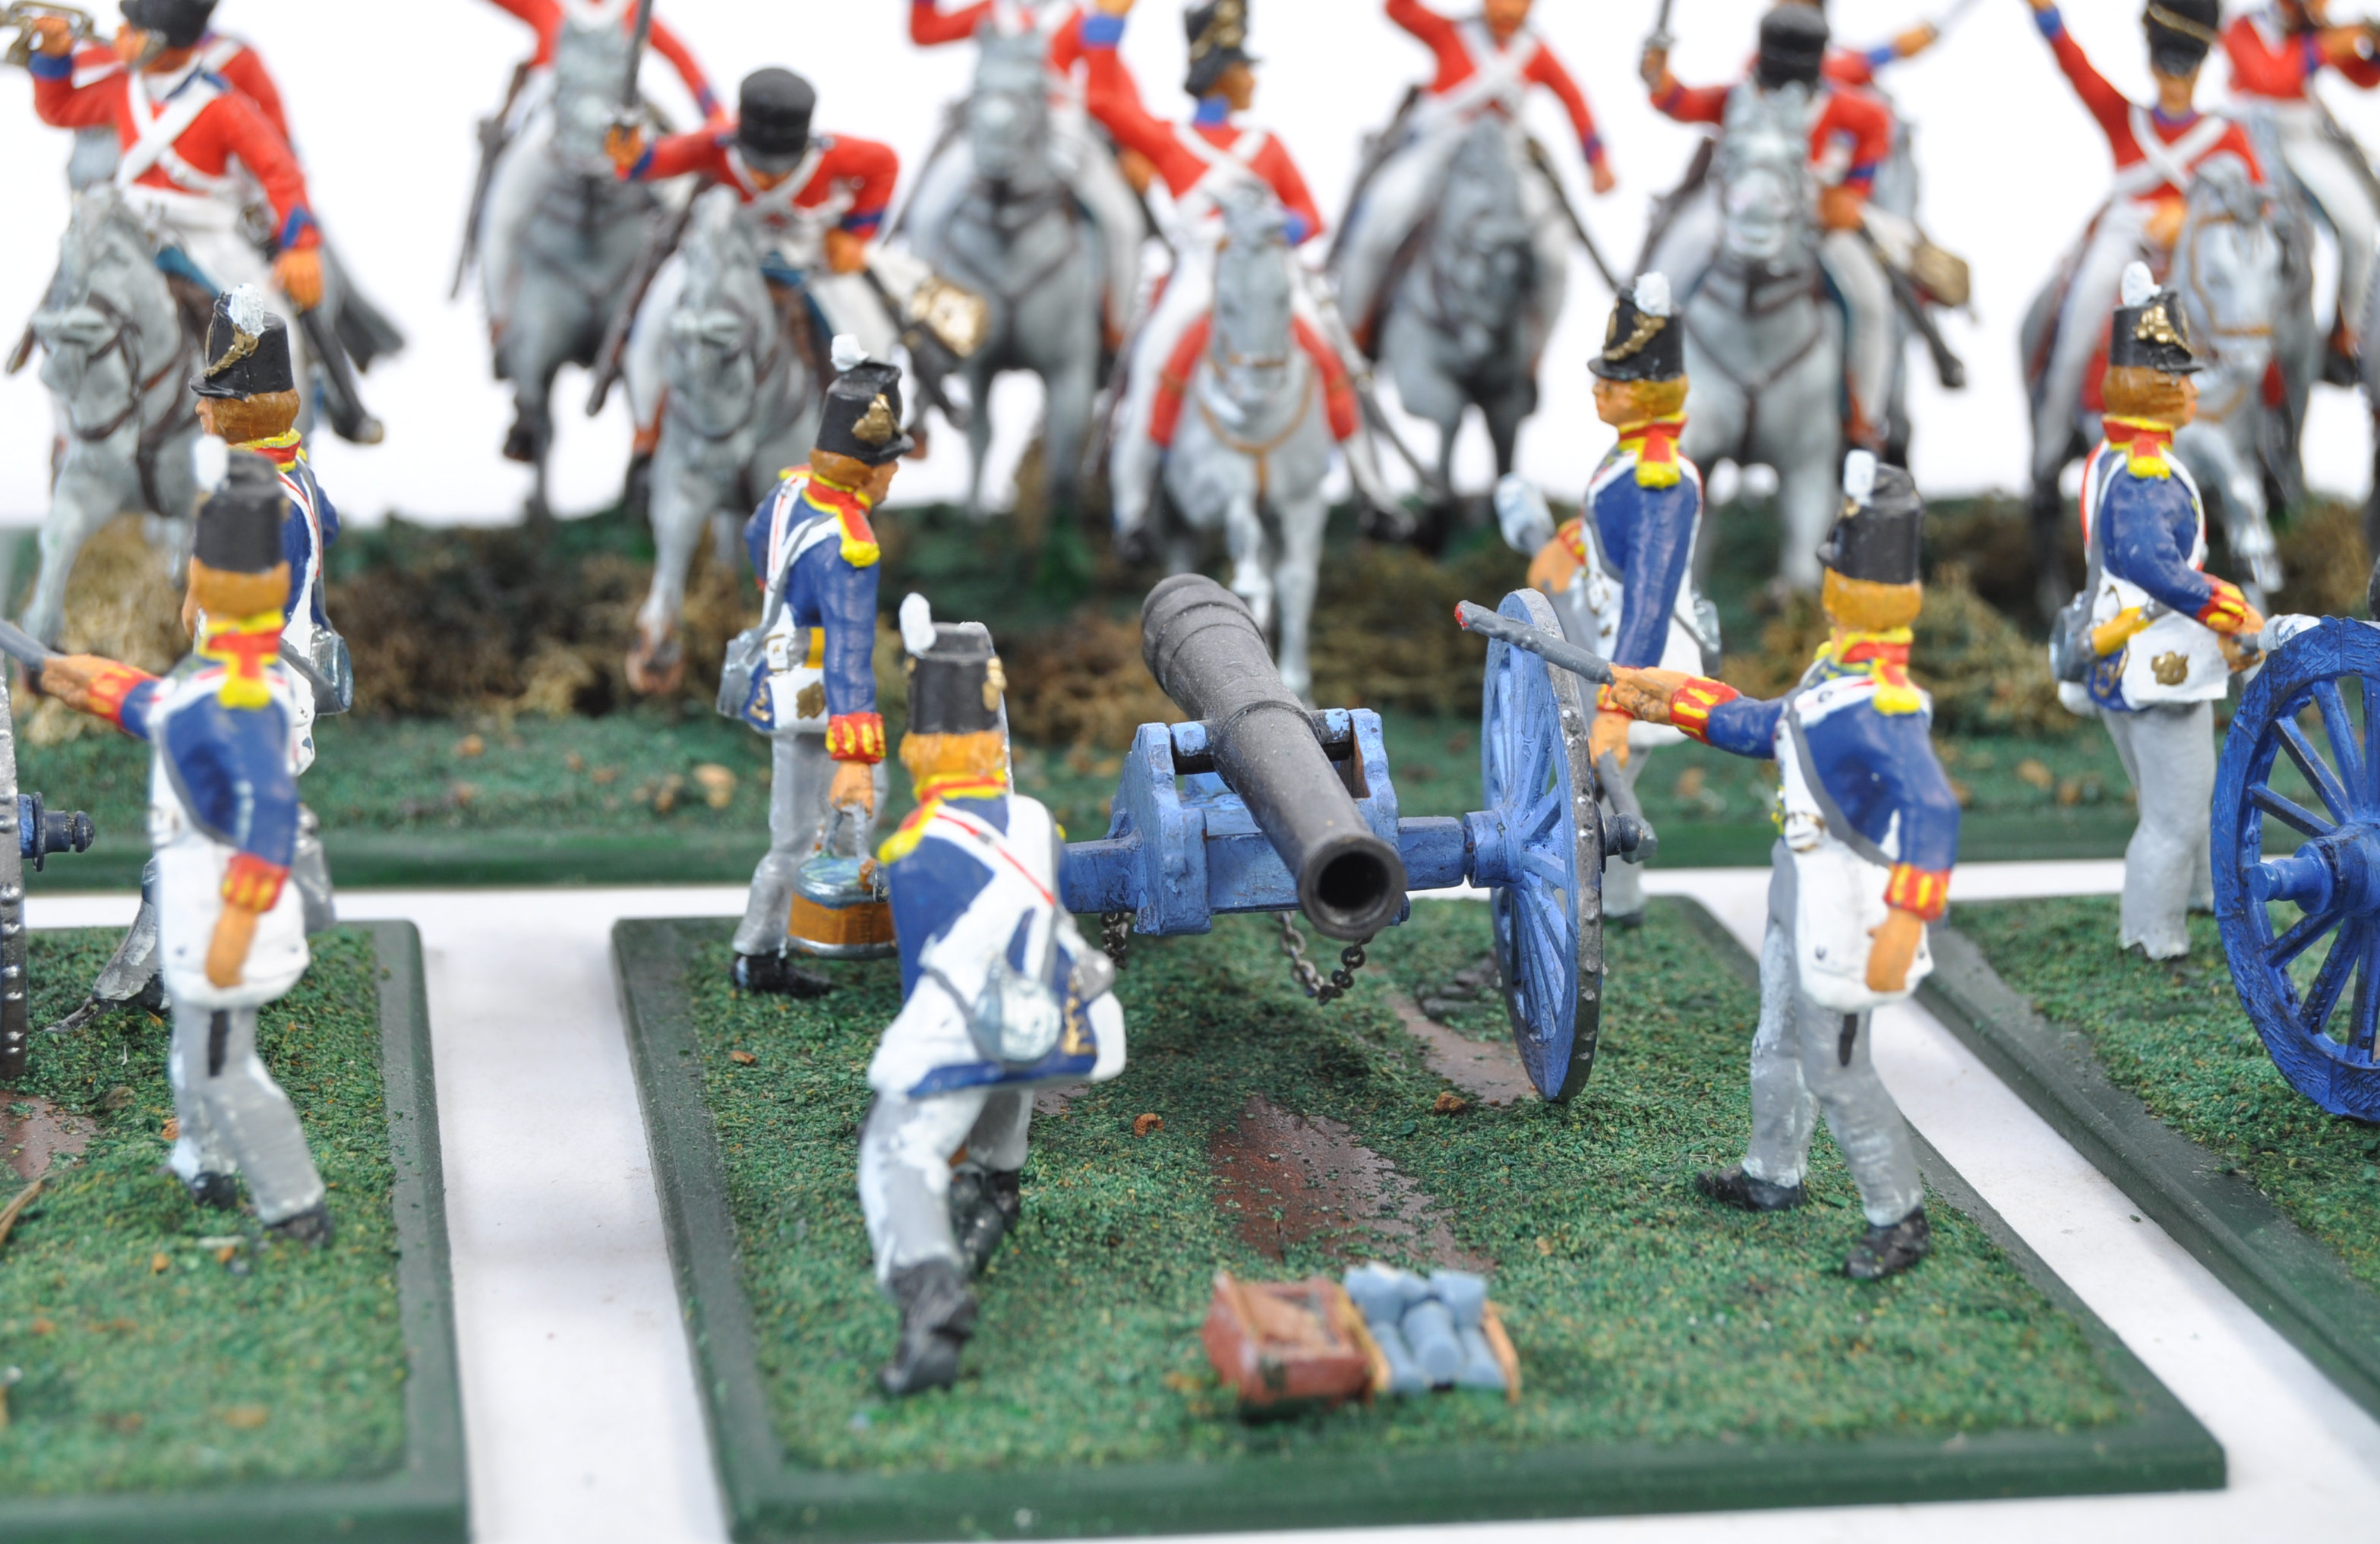 COLLECTION OF 1/32 SCALE PLASTIC NAPOLEONIC SOLDIER FIGURES - Image 2 of 5